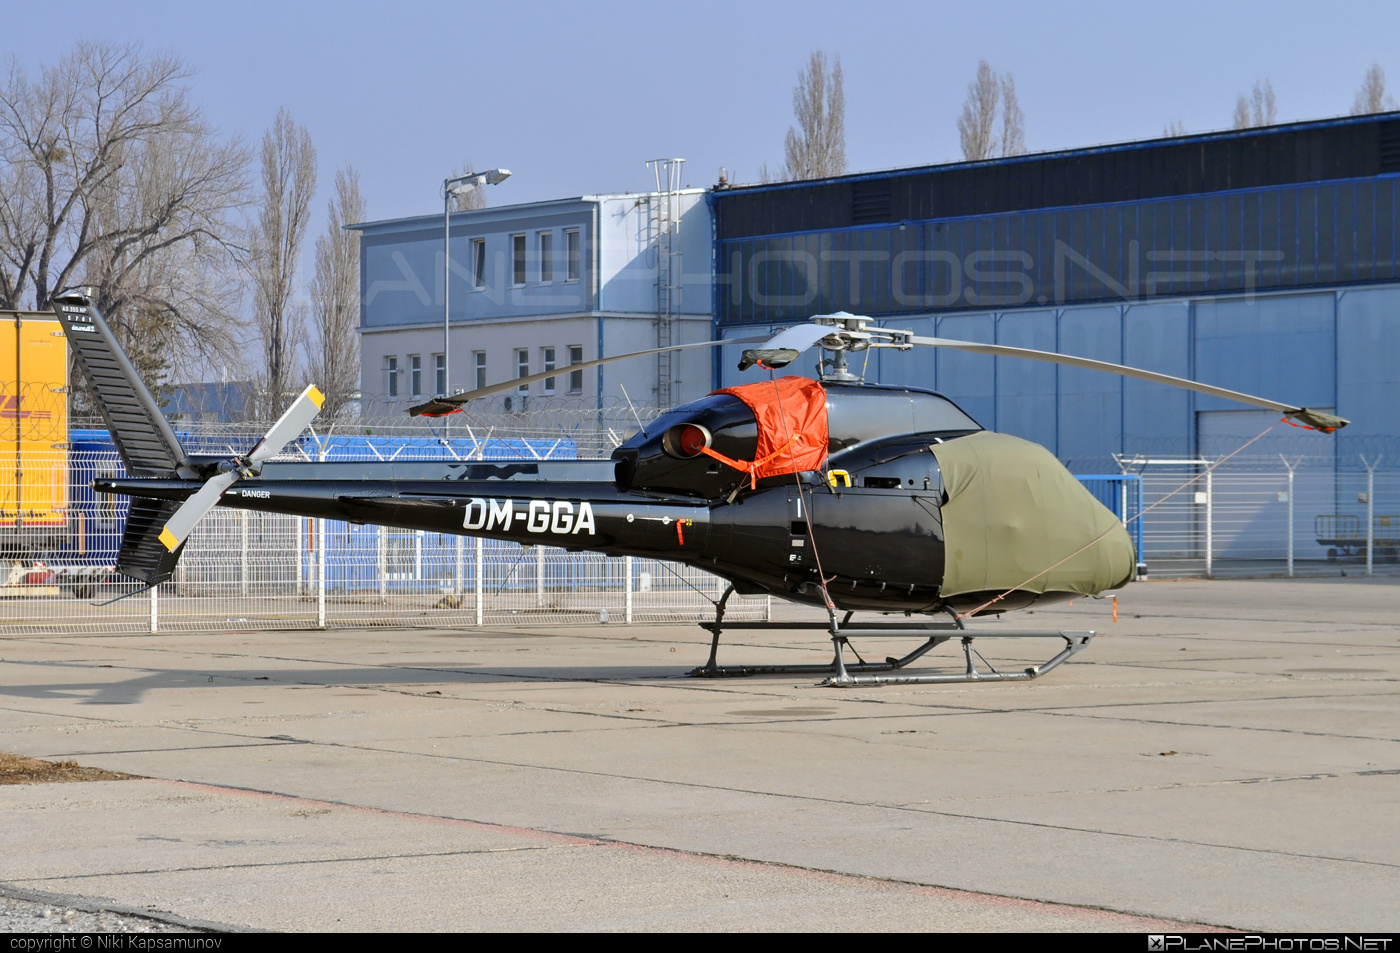 Eurocopter AS355 NP Ecureuil 2 - OM-GGA operated by EHC Service #aerospatialeecureuil #as355 #as355ecureuil2 #as355np #as355npecureuil2 #ecureuil2 #eurocopter #eurocopterecureuil